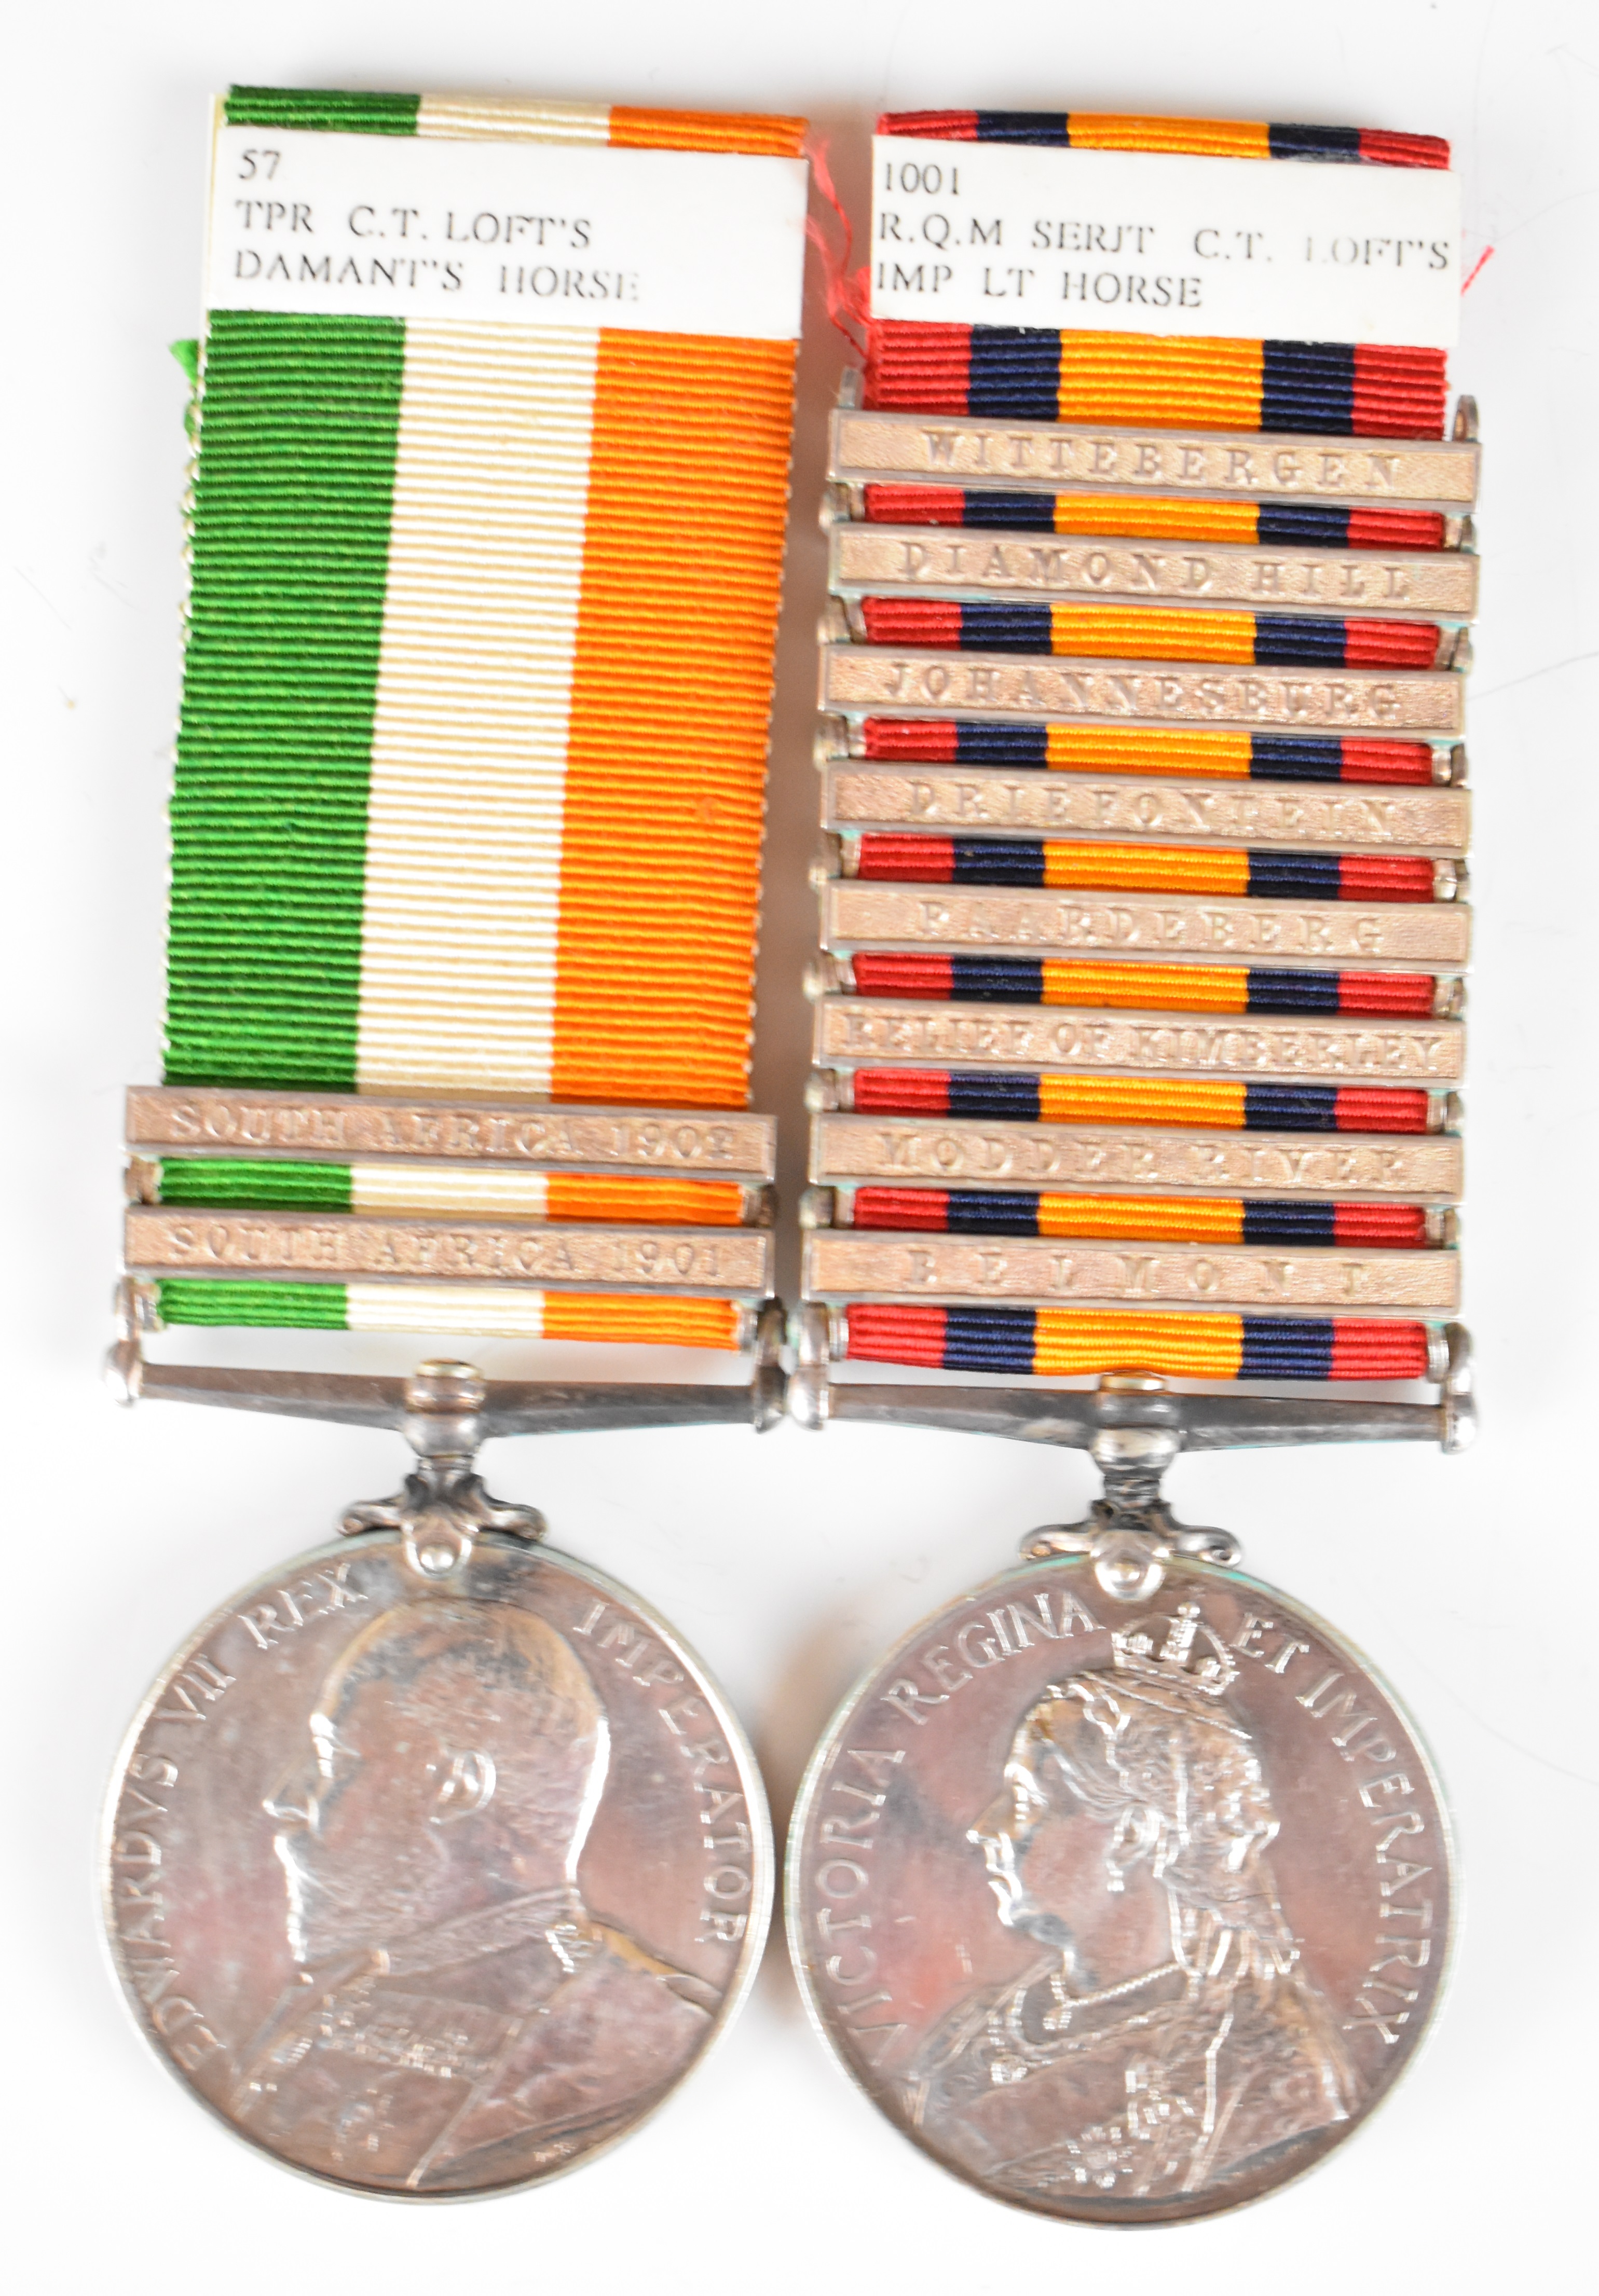 Queen's South Africa Medal with eight clasps for Belmont, Modder River, Relief of Kimberley,